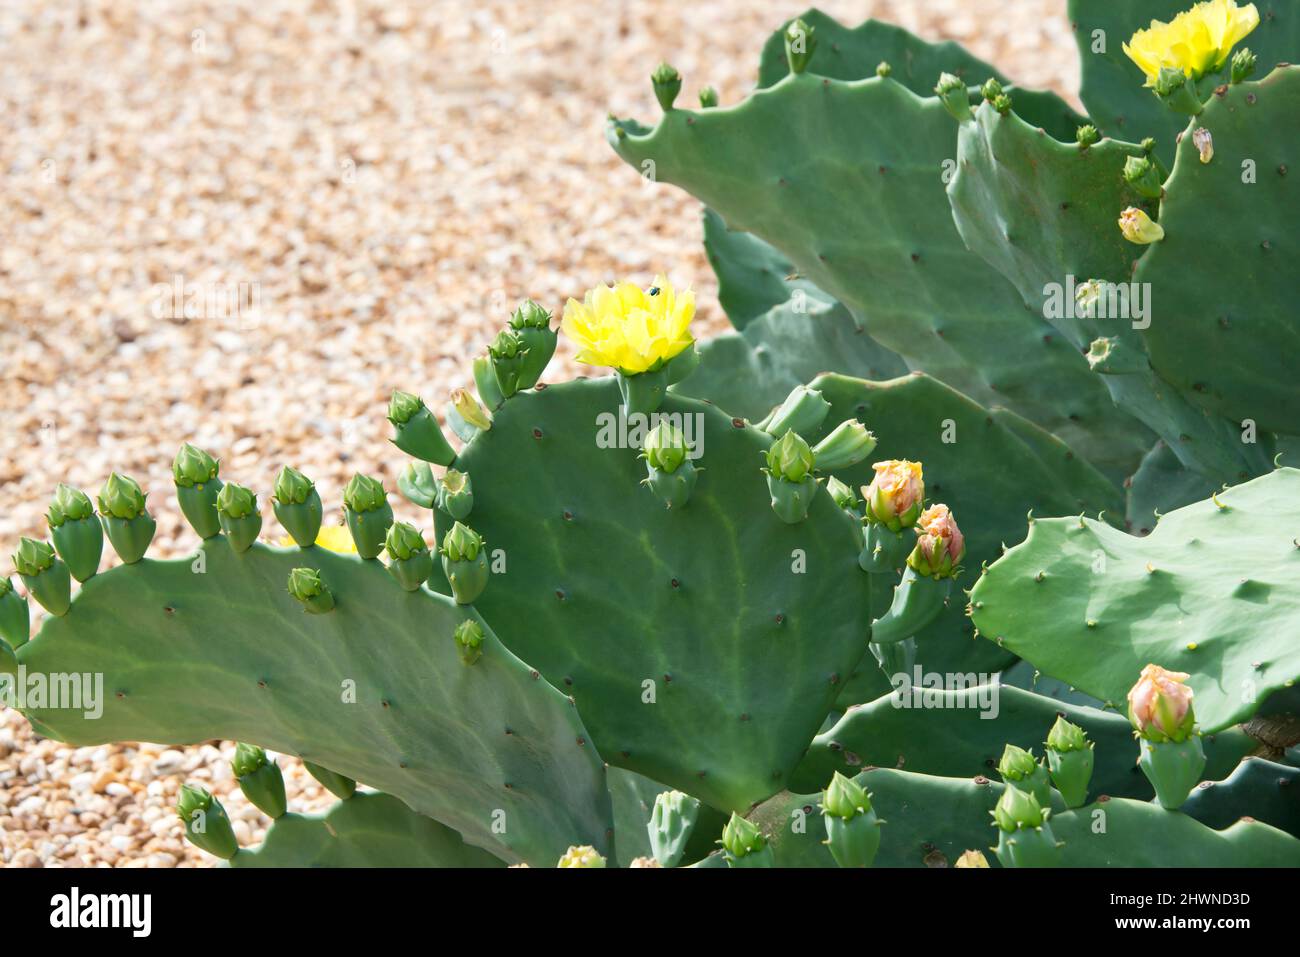 Large Cactus with Buds and Yellow Flowers Stock Photo